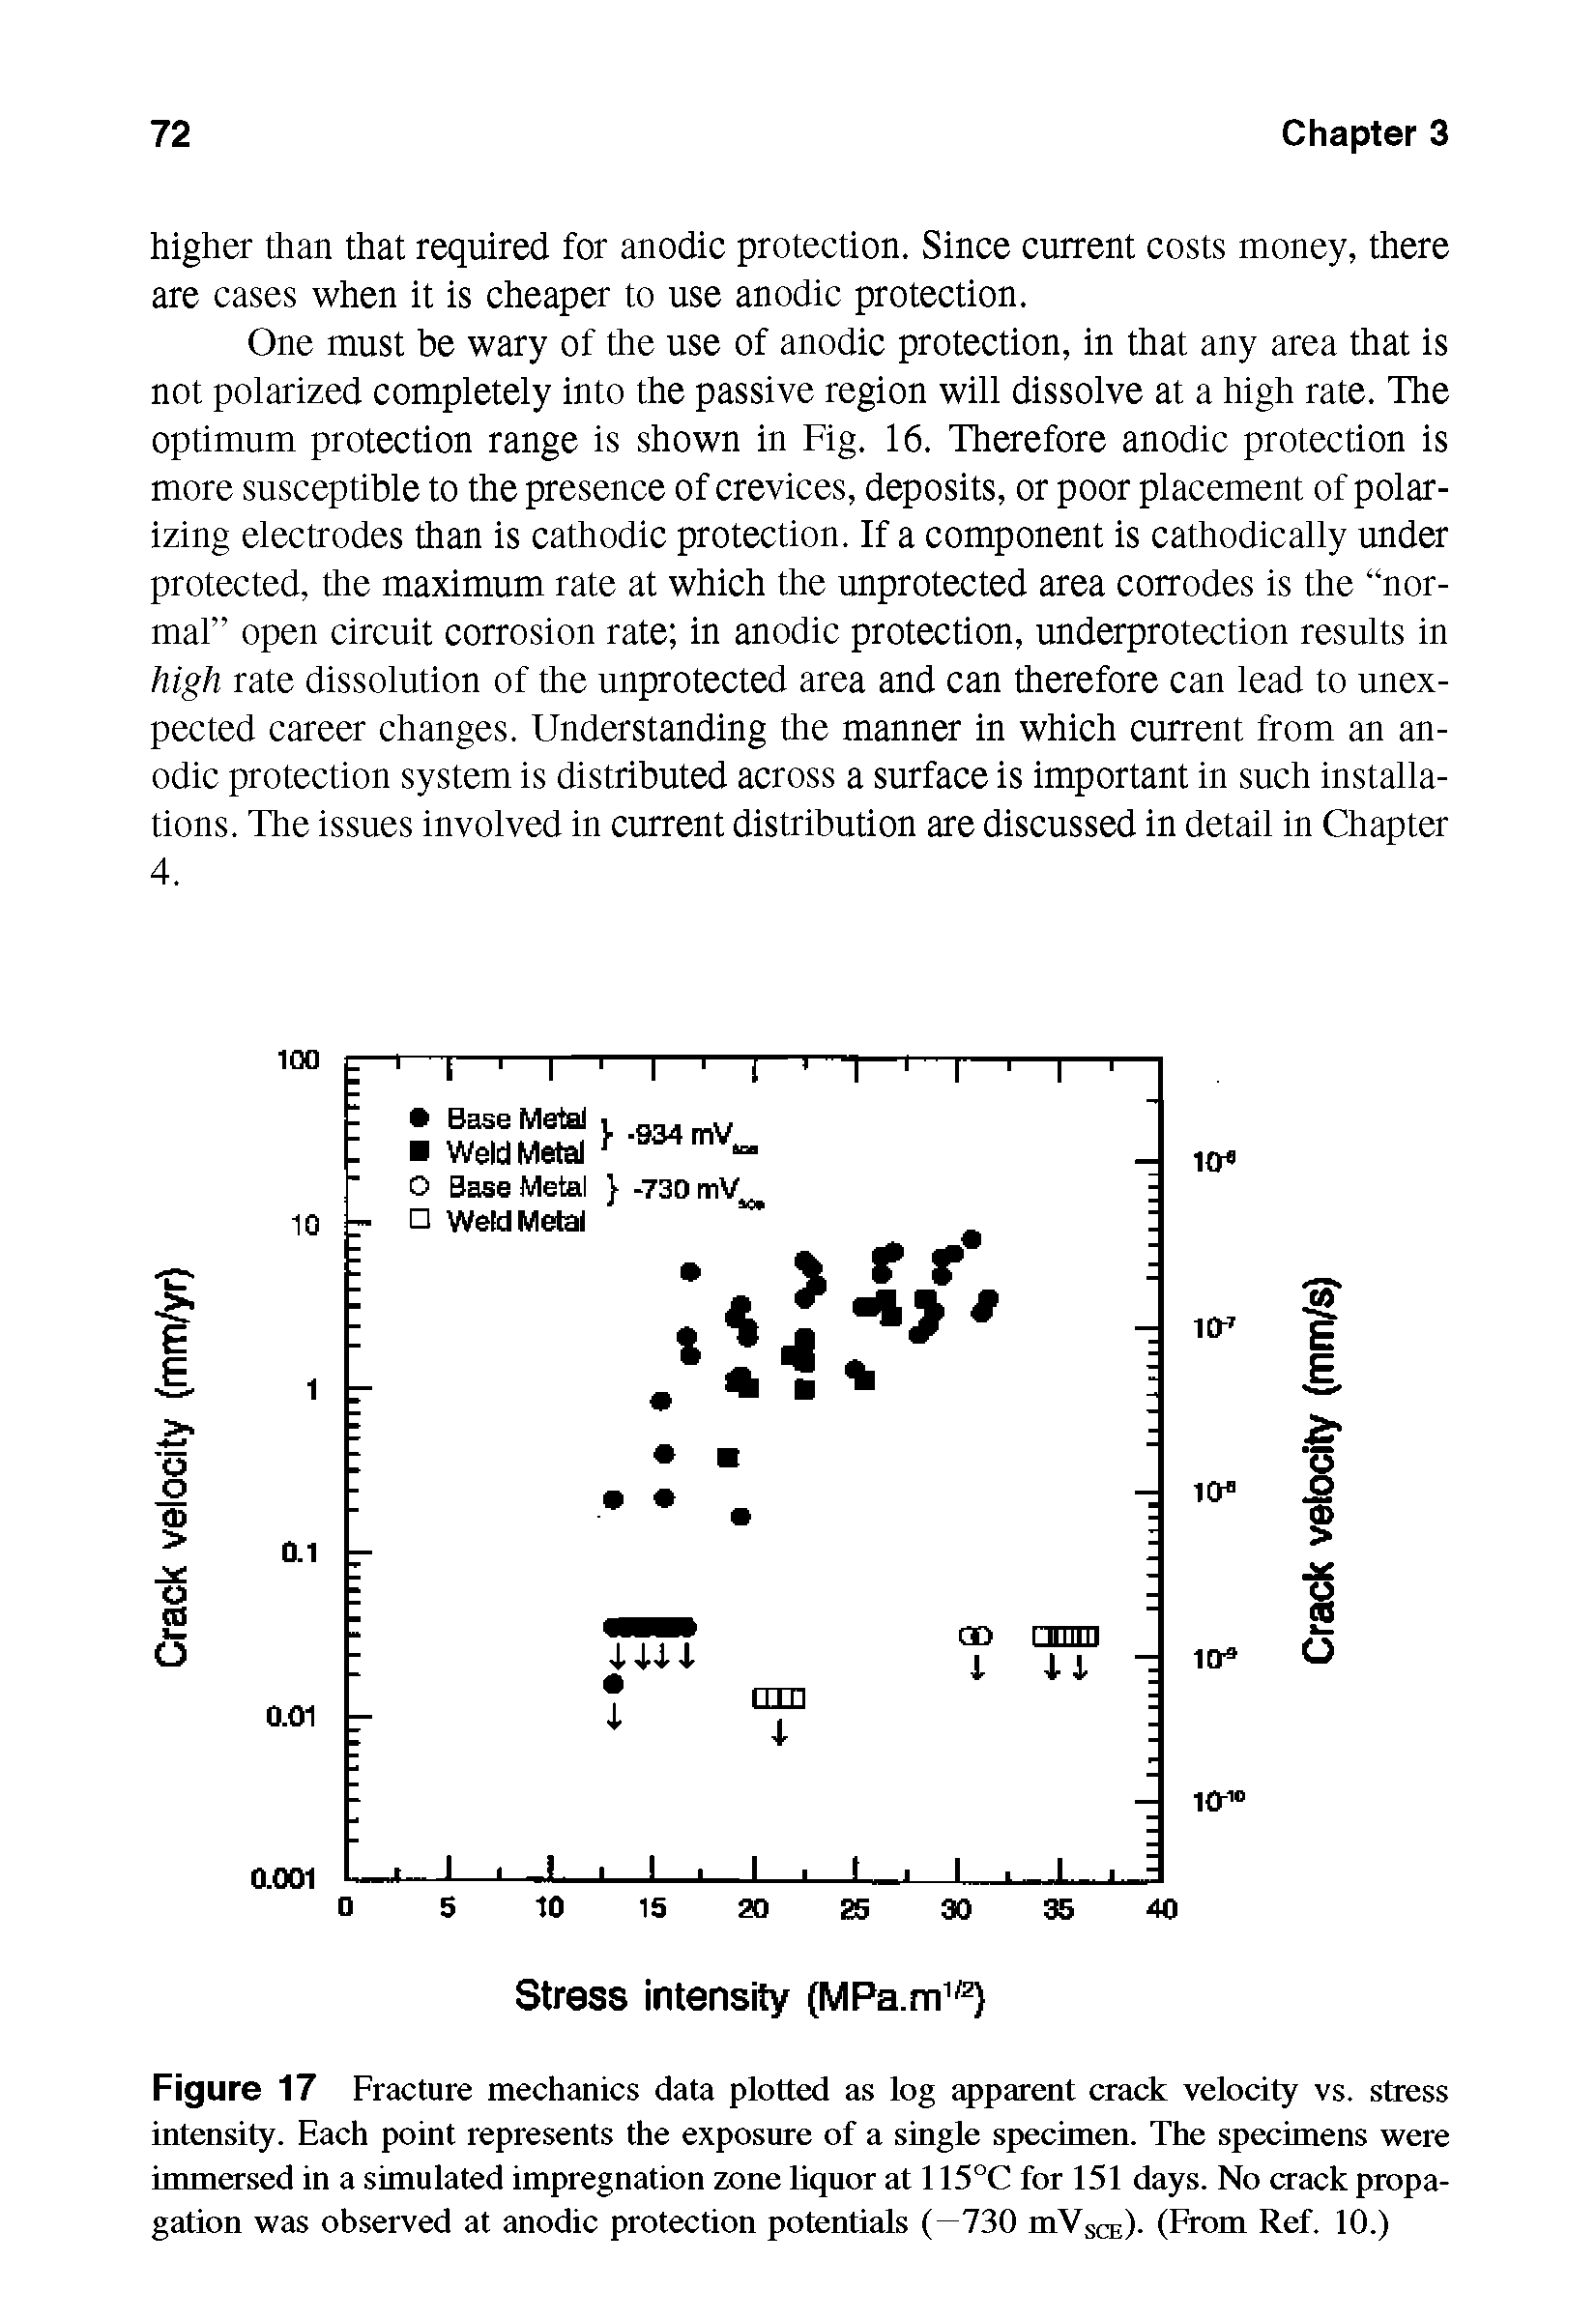 Figure 17 Fracture mechanics data plotted as log apparent crack velocity vs. stress intensity. Each point represents the exposure of a single specimen. The specimens were immersed in a simulated impregnation zone liquor at 115°C for 151 days. No crack propagation was observed at anodic protection potentials (—730 mVSCE). (From Ref. 10.)...